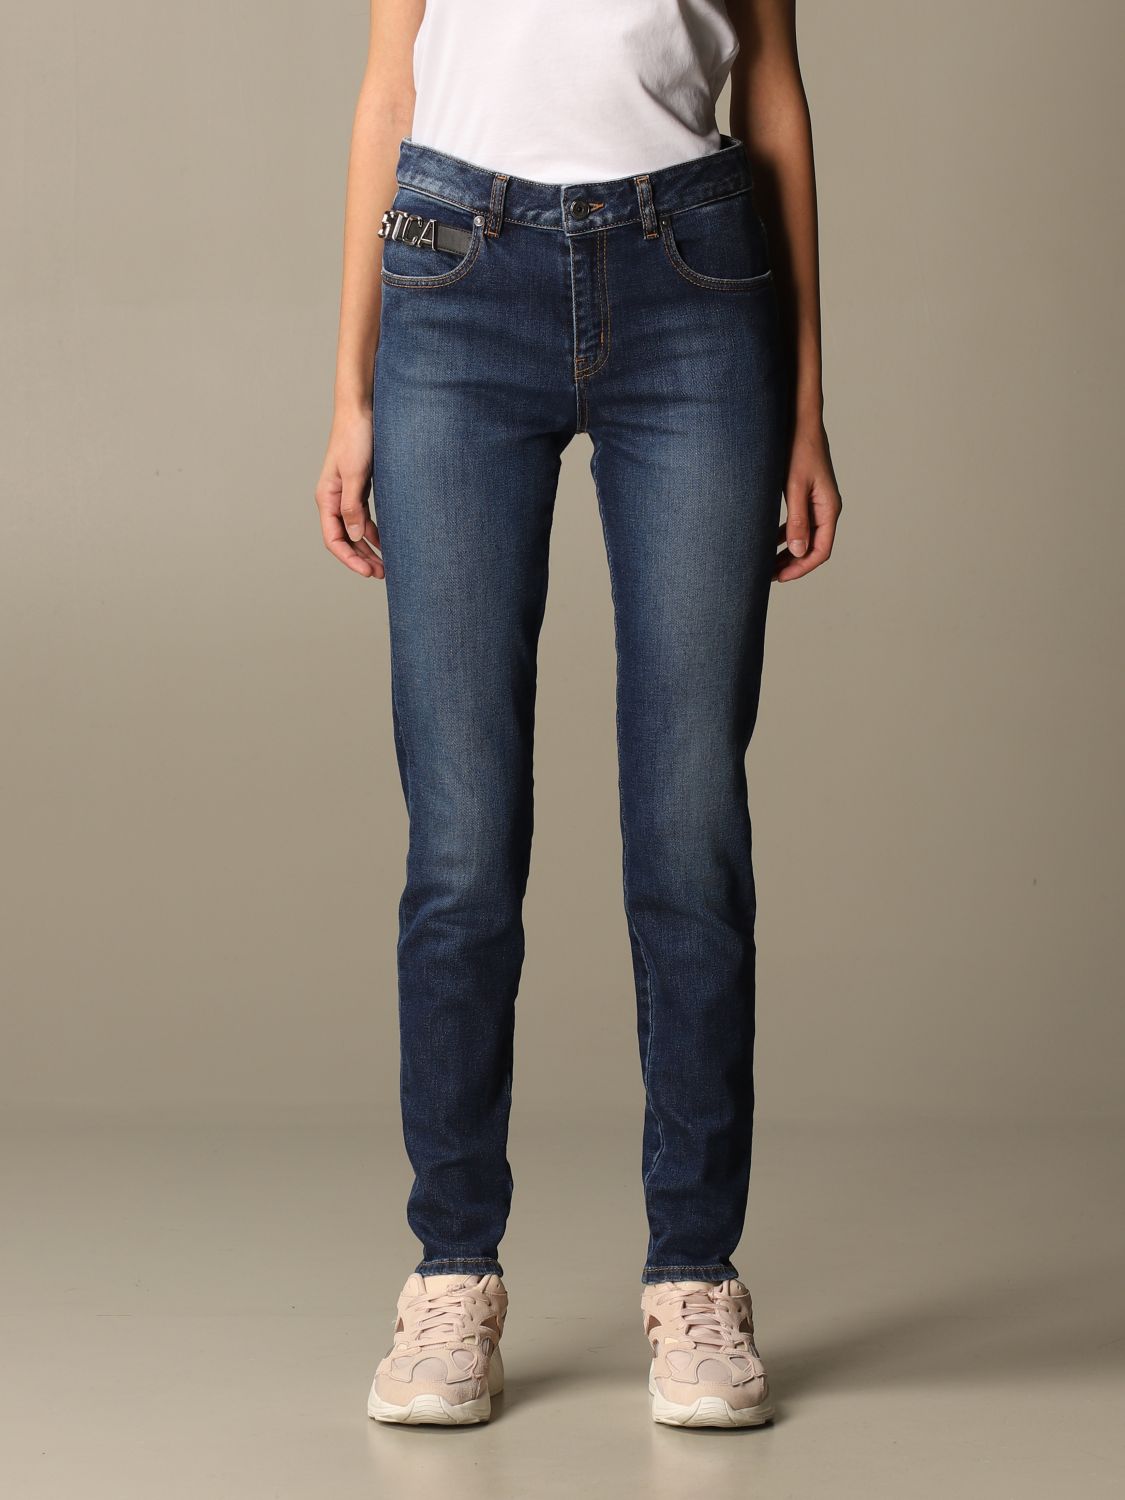 Just Cavalli Outlet: jeans in used denim Denim | Just Cavalli jeans on GIGLIO.COM